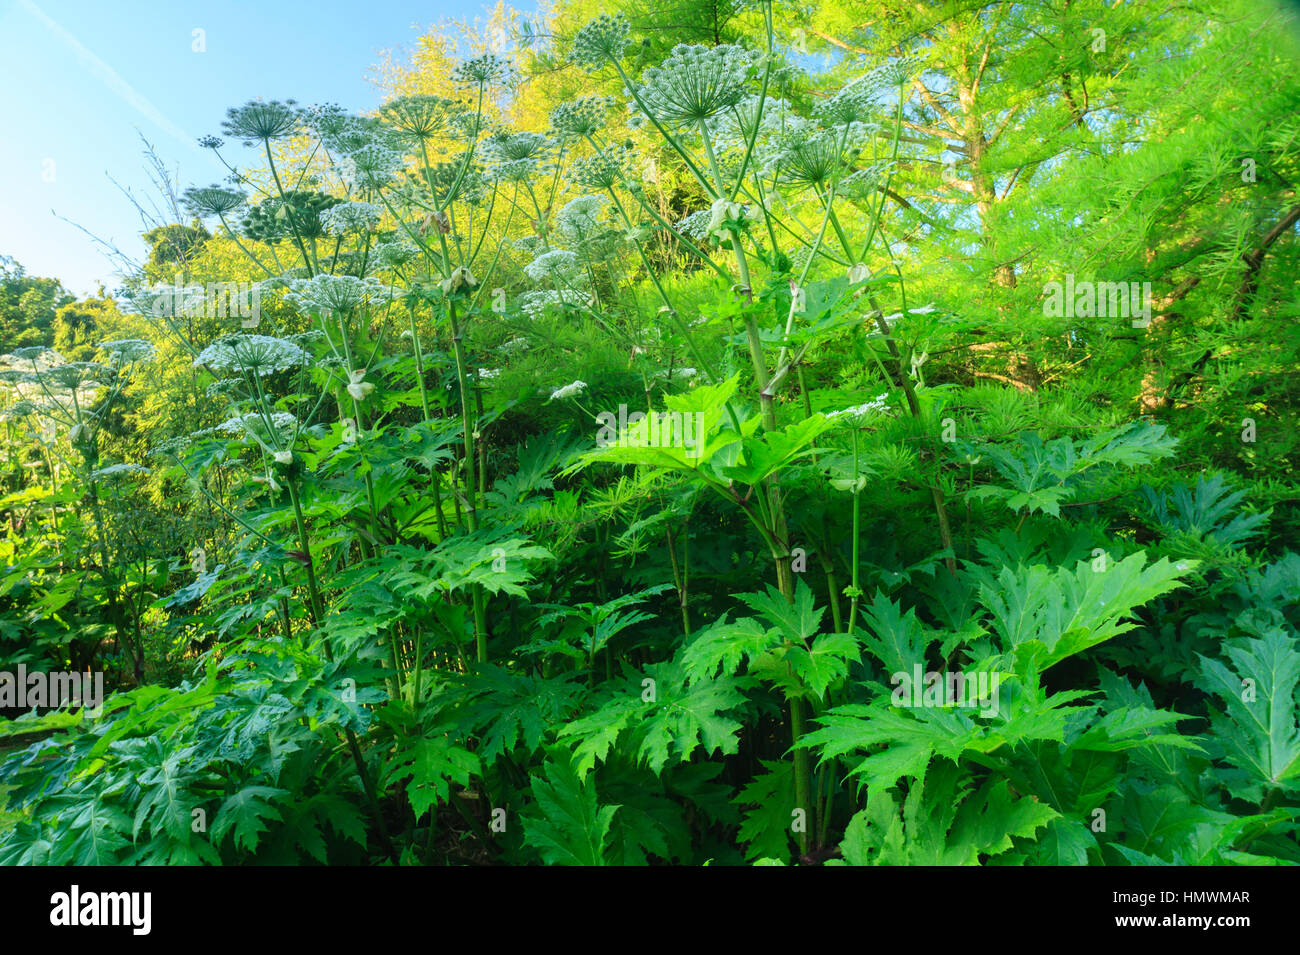 Giant hogweed, Heracleum mantegazzianum in a garden, Normandy, France. Stock Photo